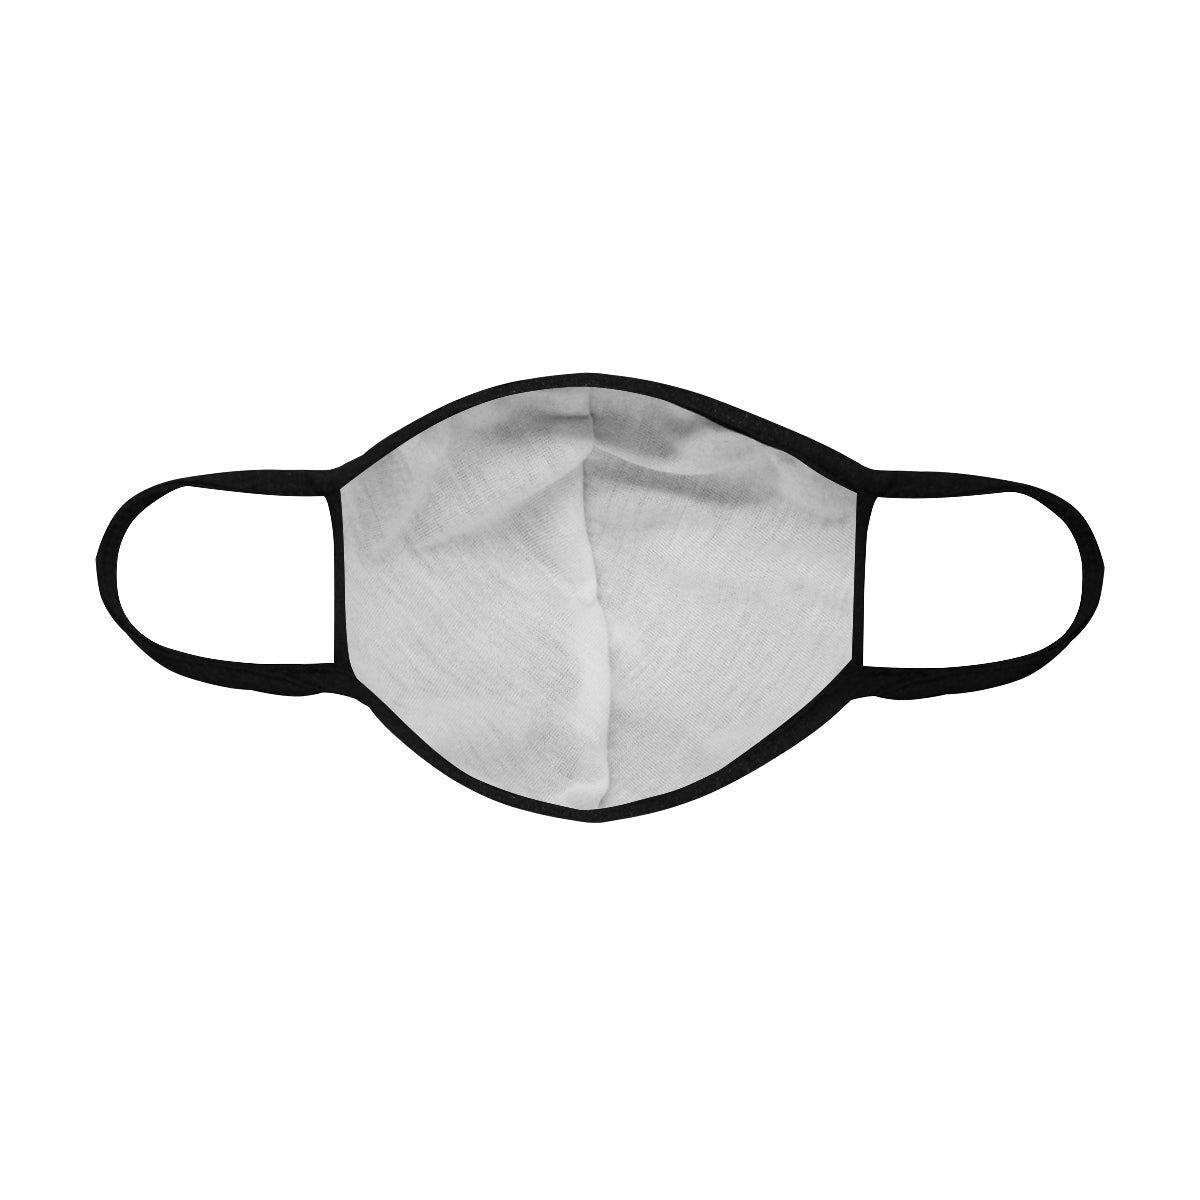 flyersetcinc Leaf Camo Print Cotton Fabric Face Mask with filter slot (30 Filters Included) - Non-medical use